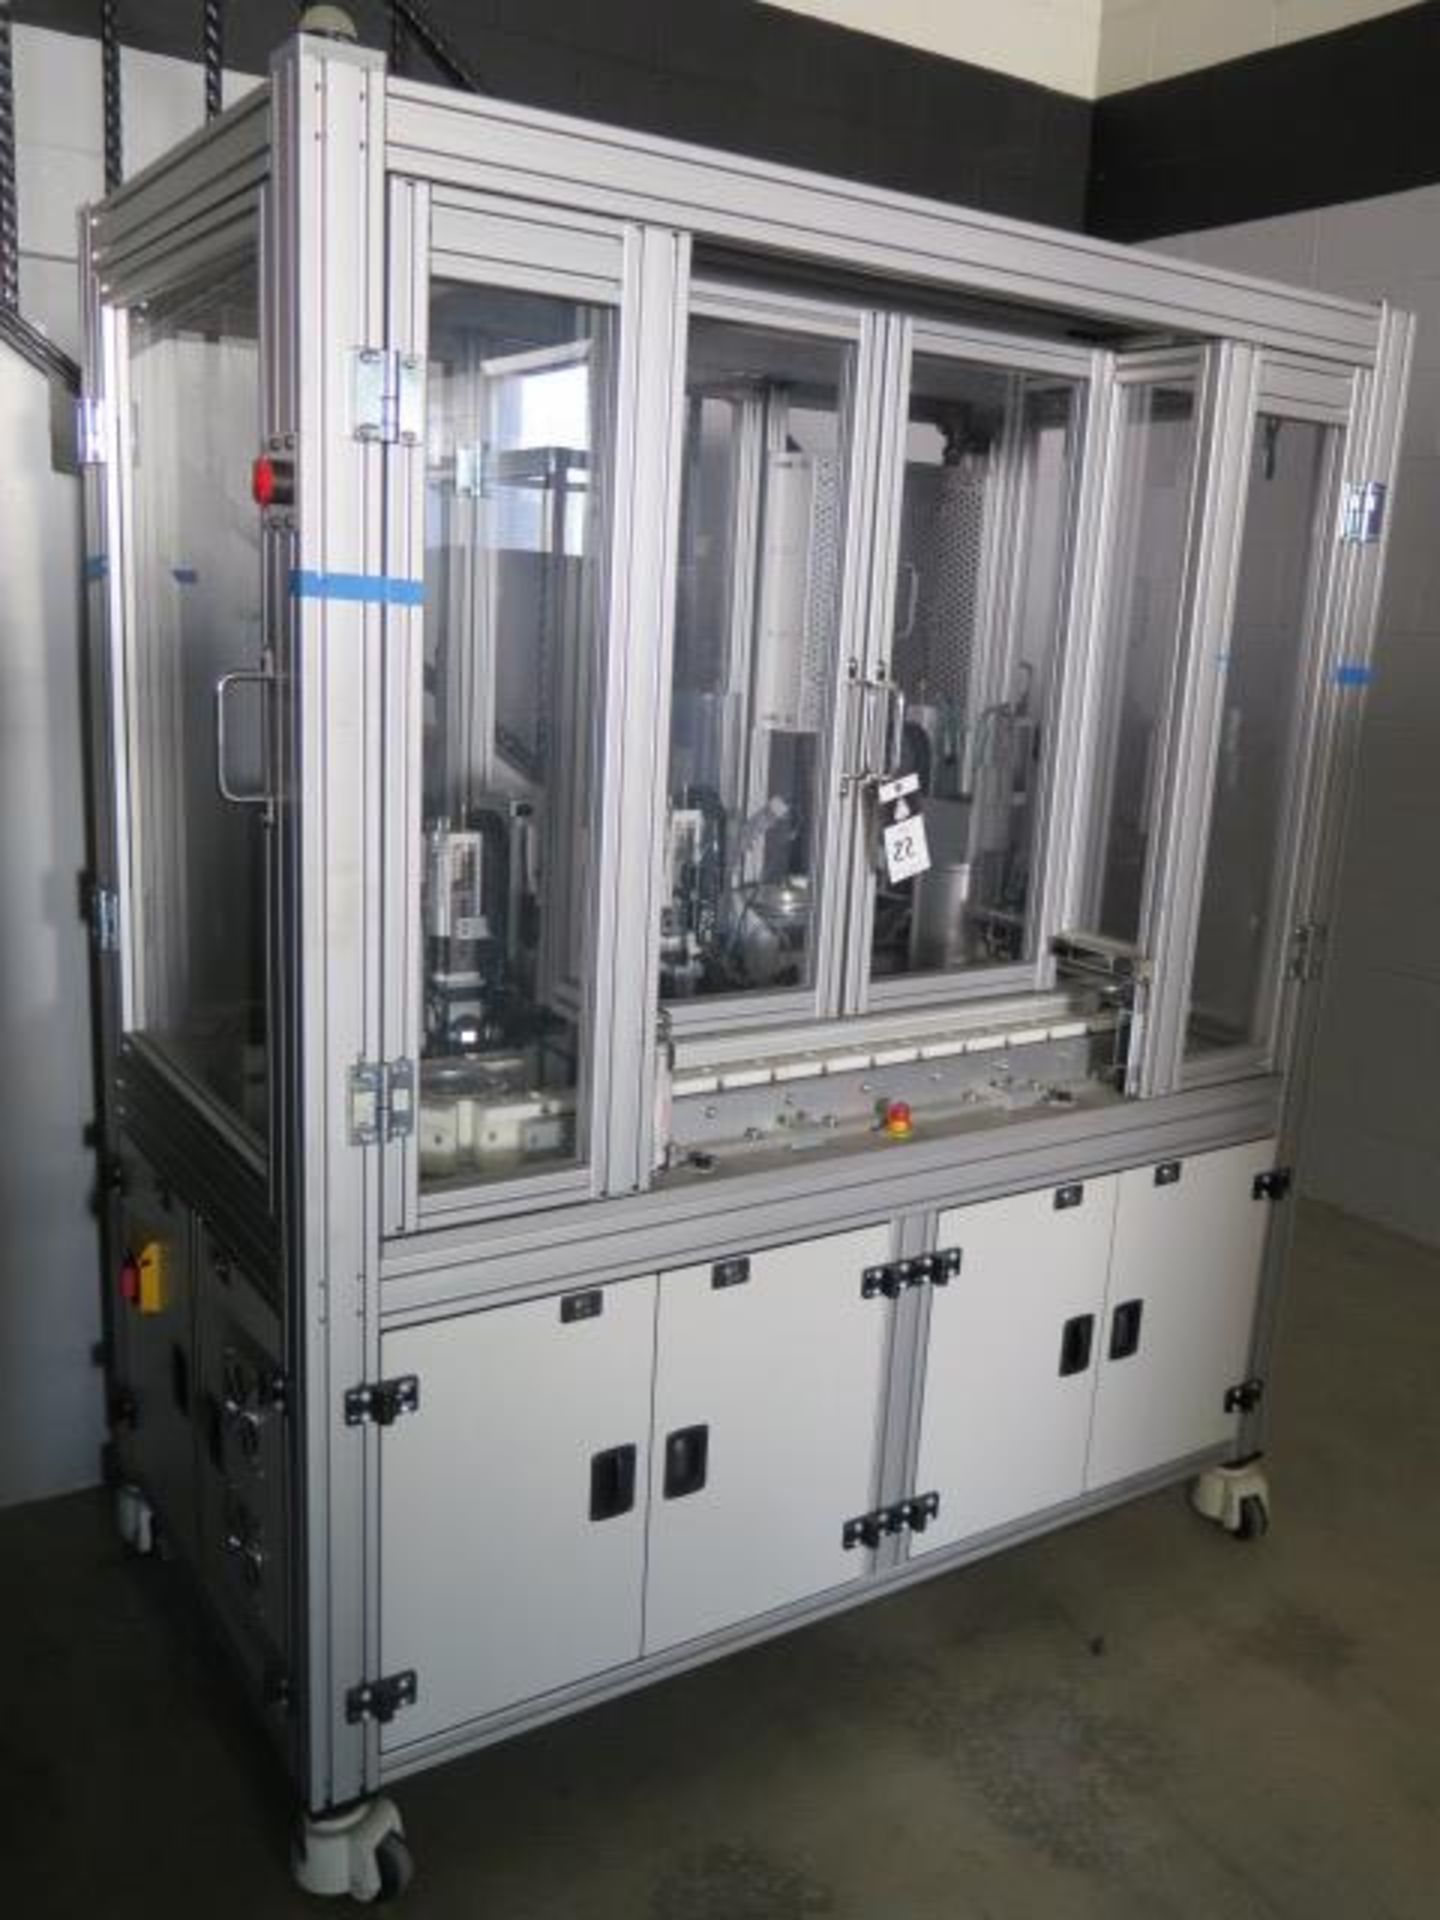 Automated Vitamin D Machine Line w/ PLC Controls, Tube and Cap Feeders, Enclosure SOLD AS-IS - Image 2 of 20